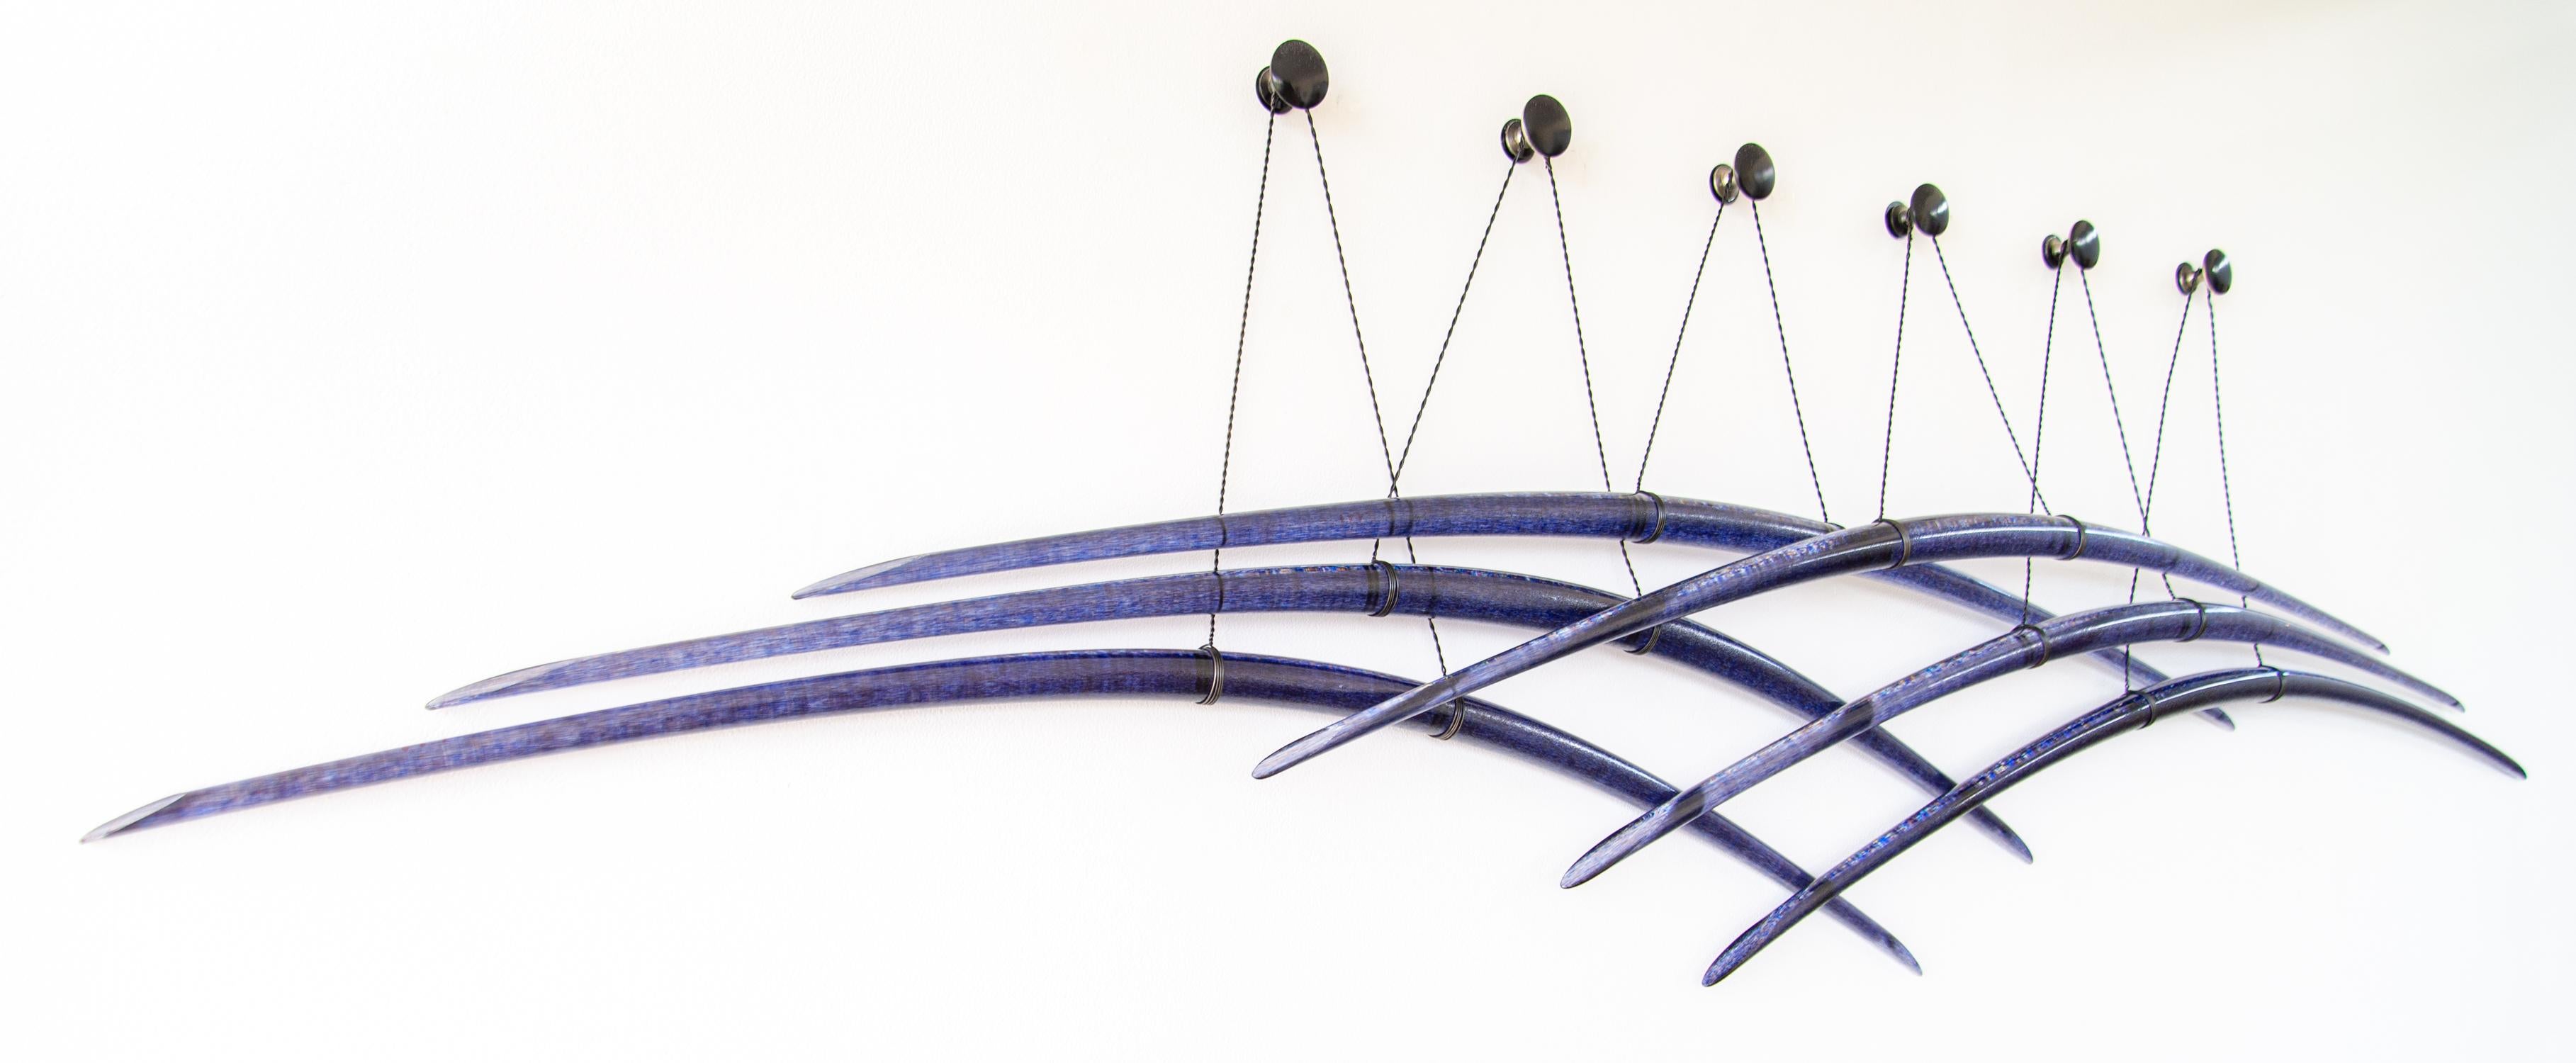 Probability Deep Blue 2 - abstract, curved, glass, suspended wall sculpture For Sale 1